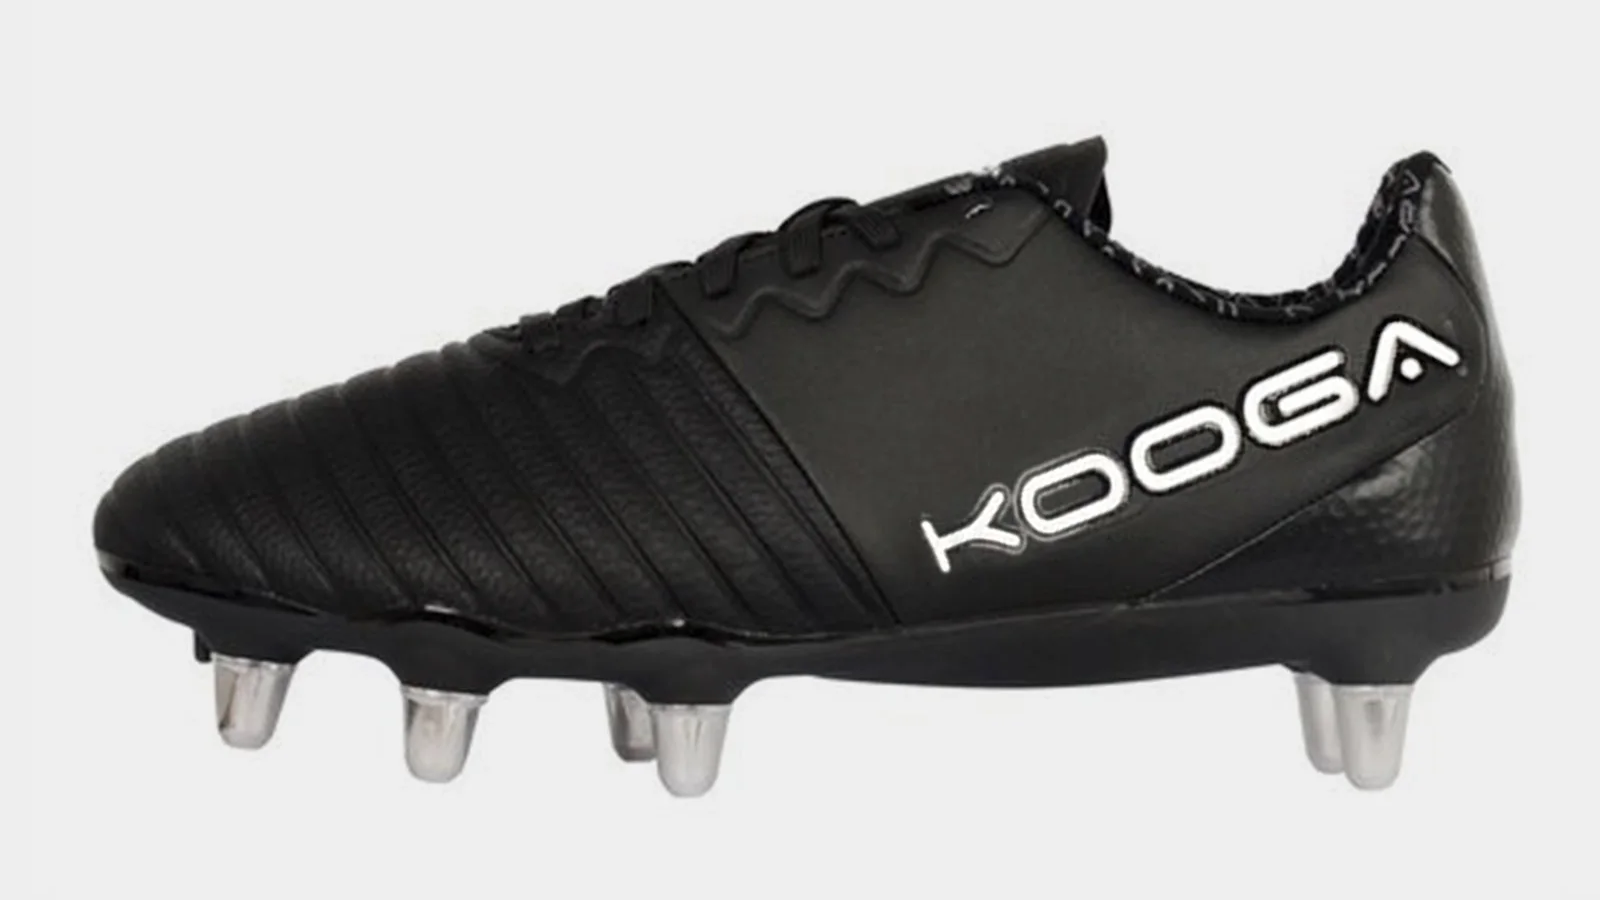 Kooga Power Rugby Boots in black, showcasing 8 studs.